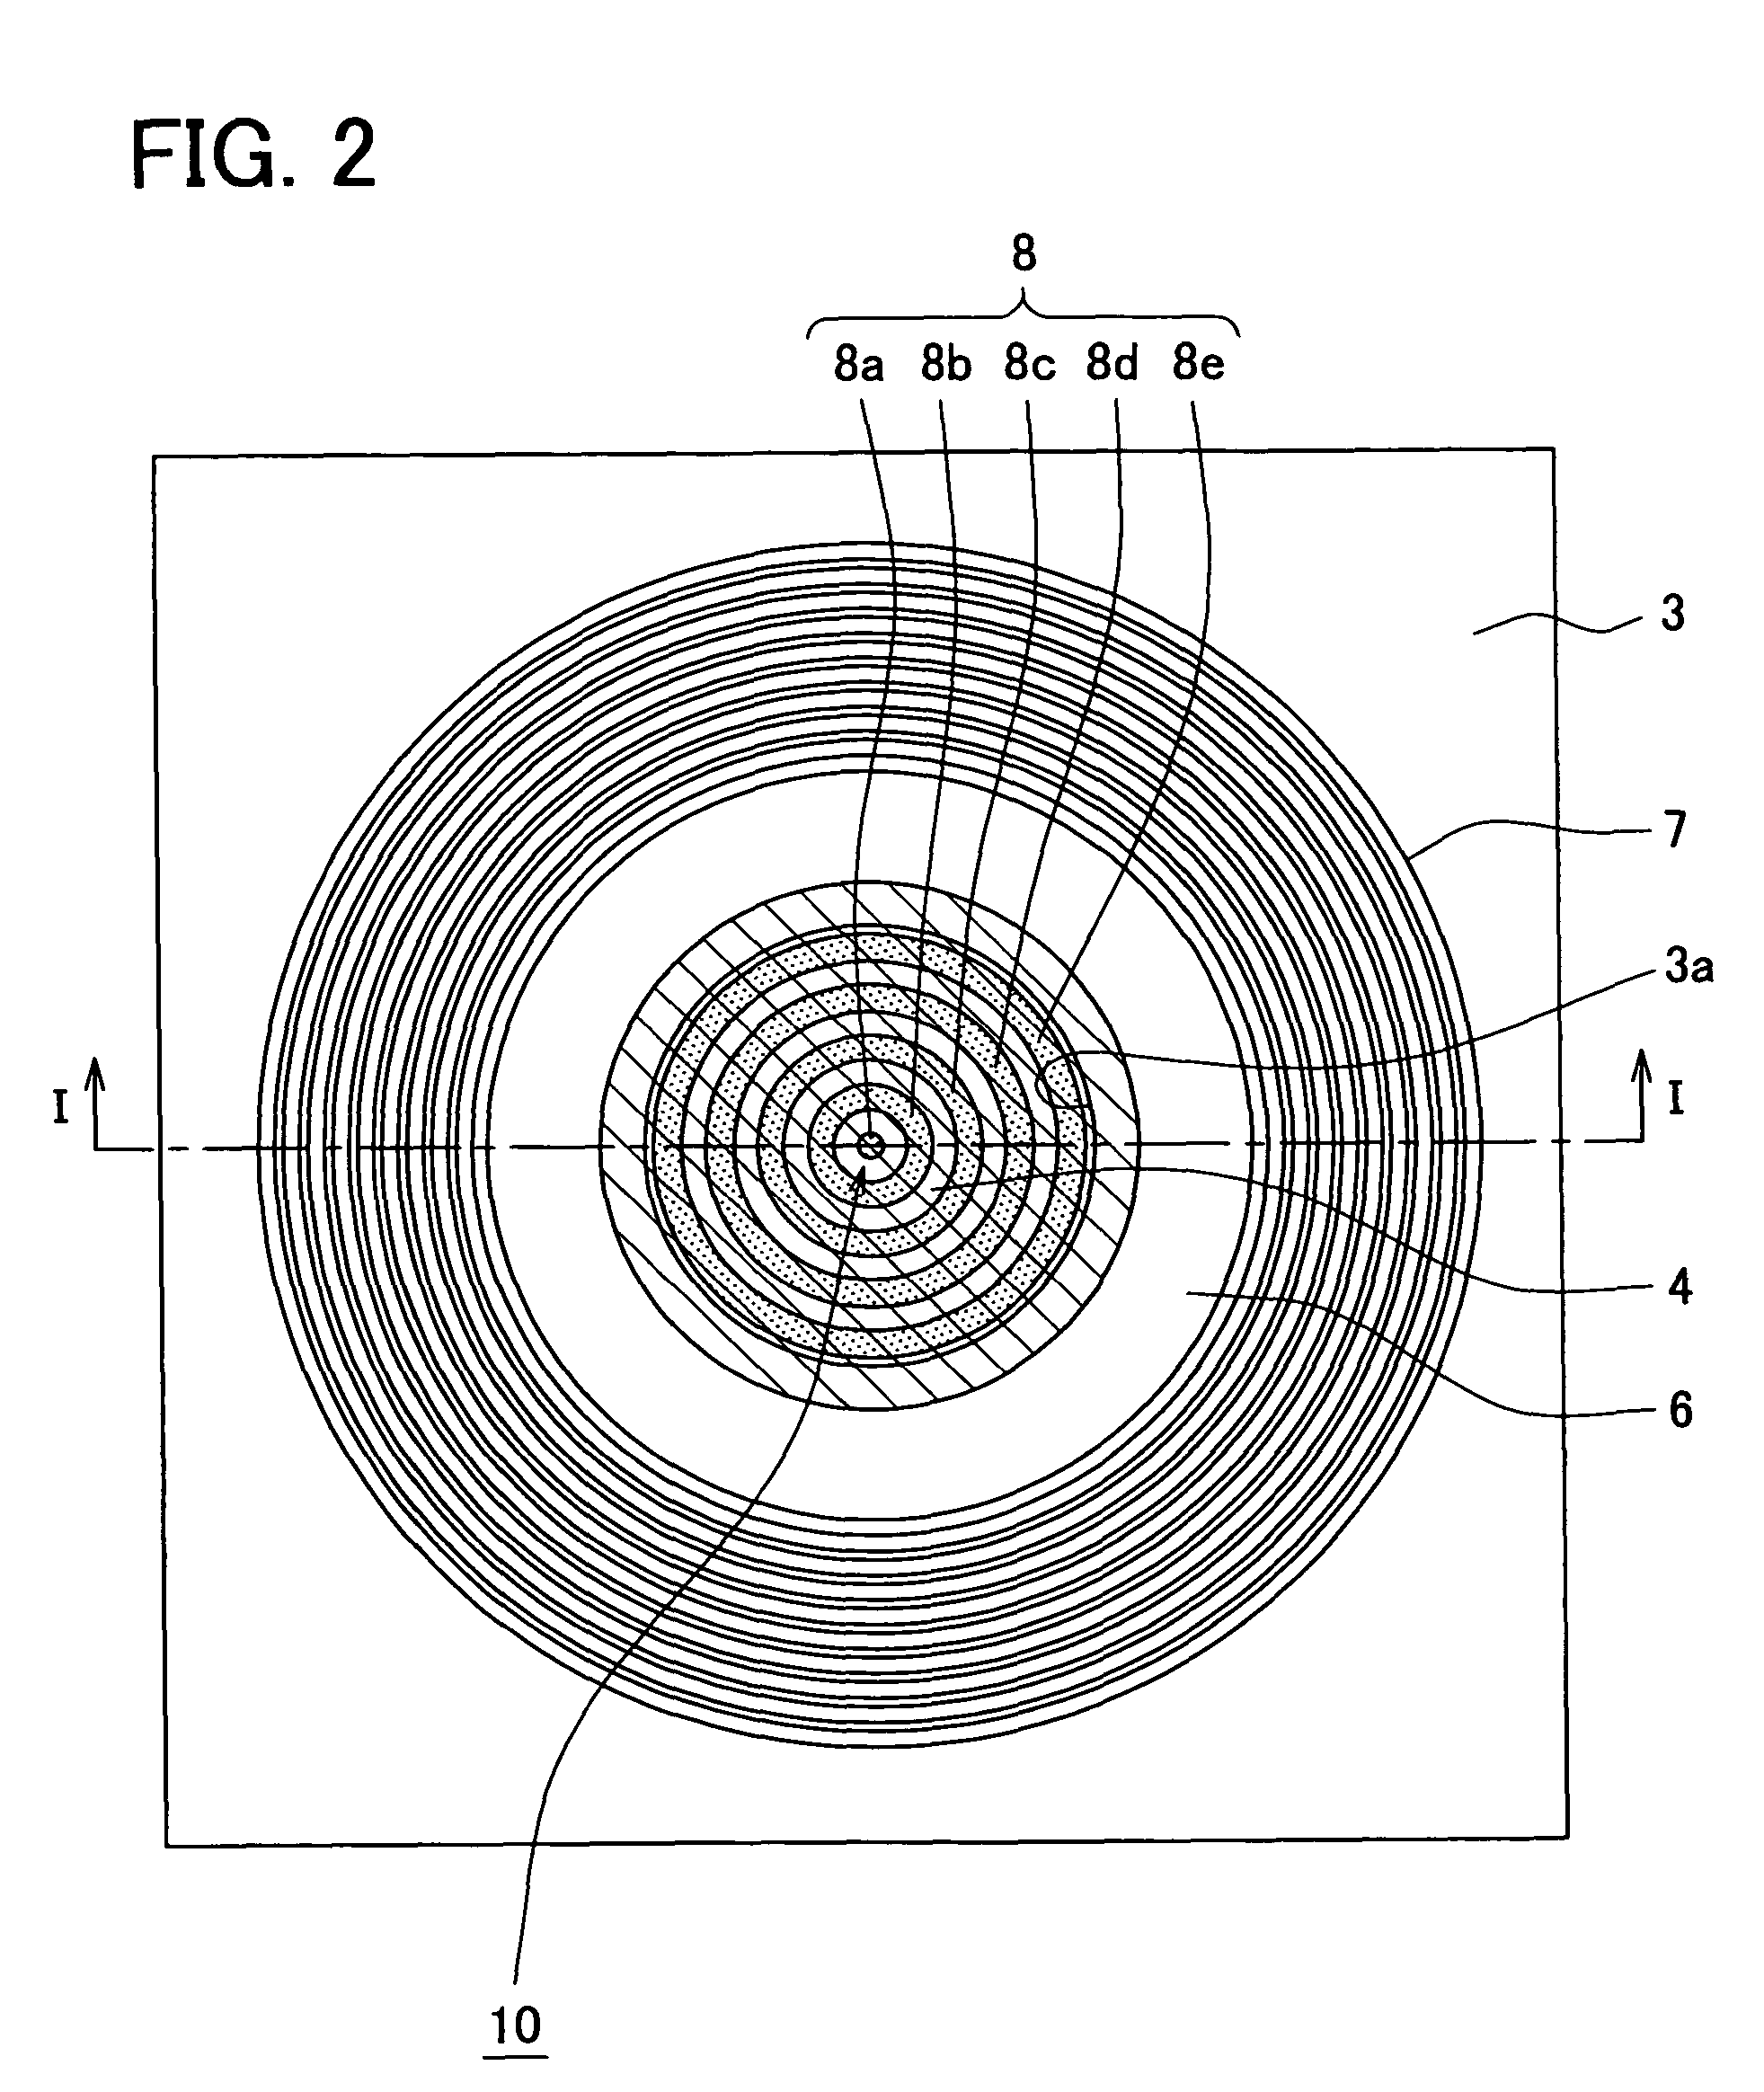 SIC semiconductor having junction barrier Schottky diode